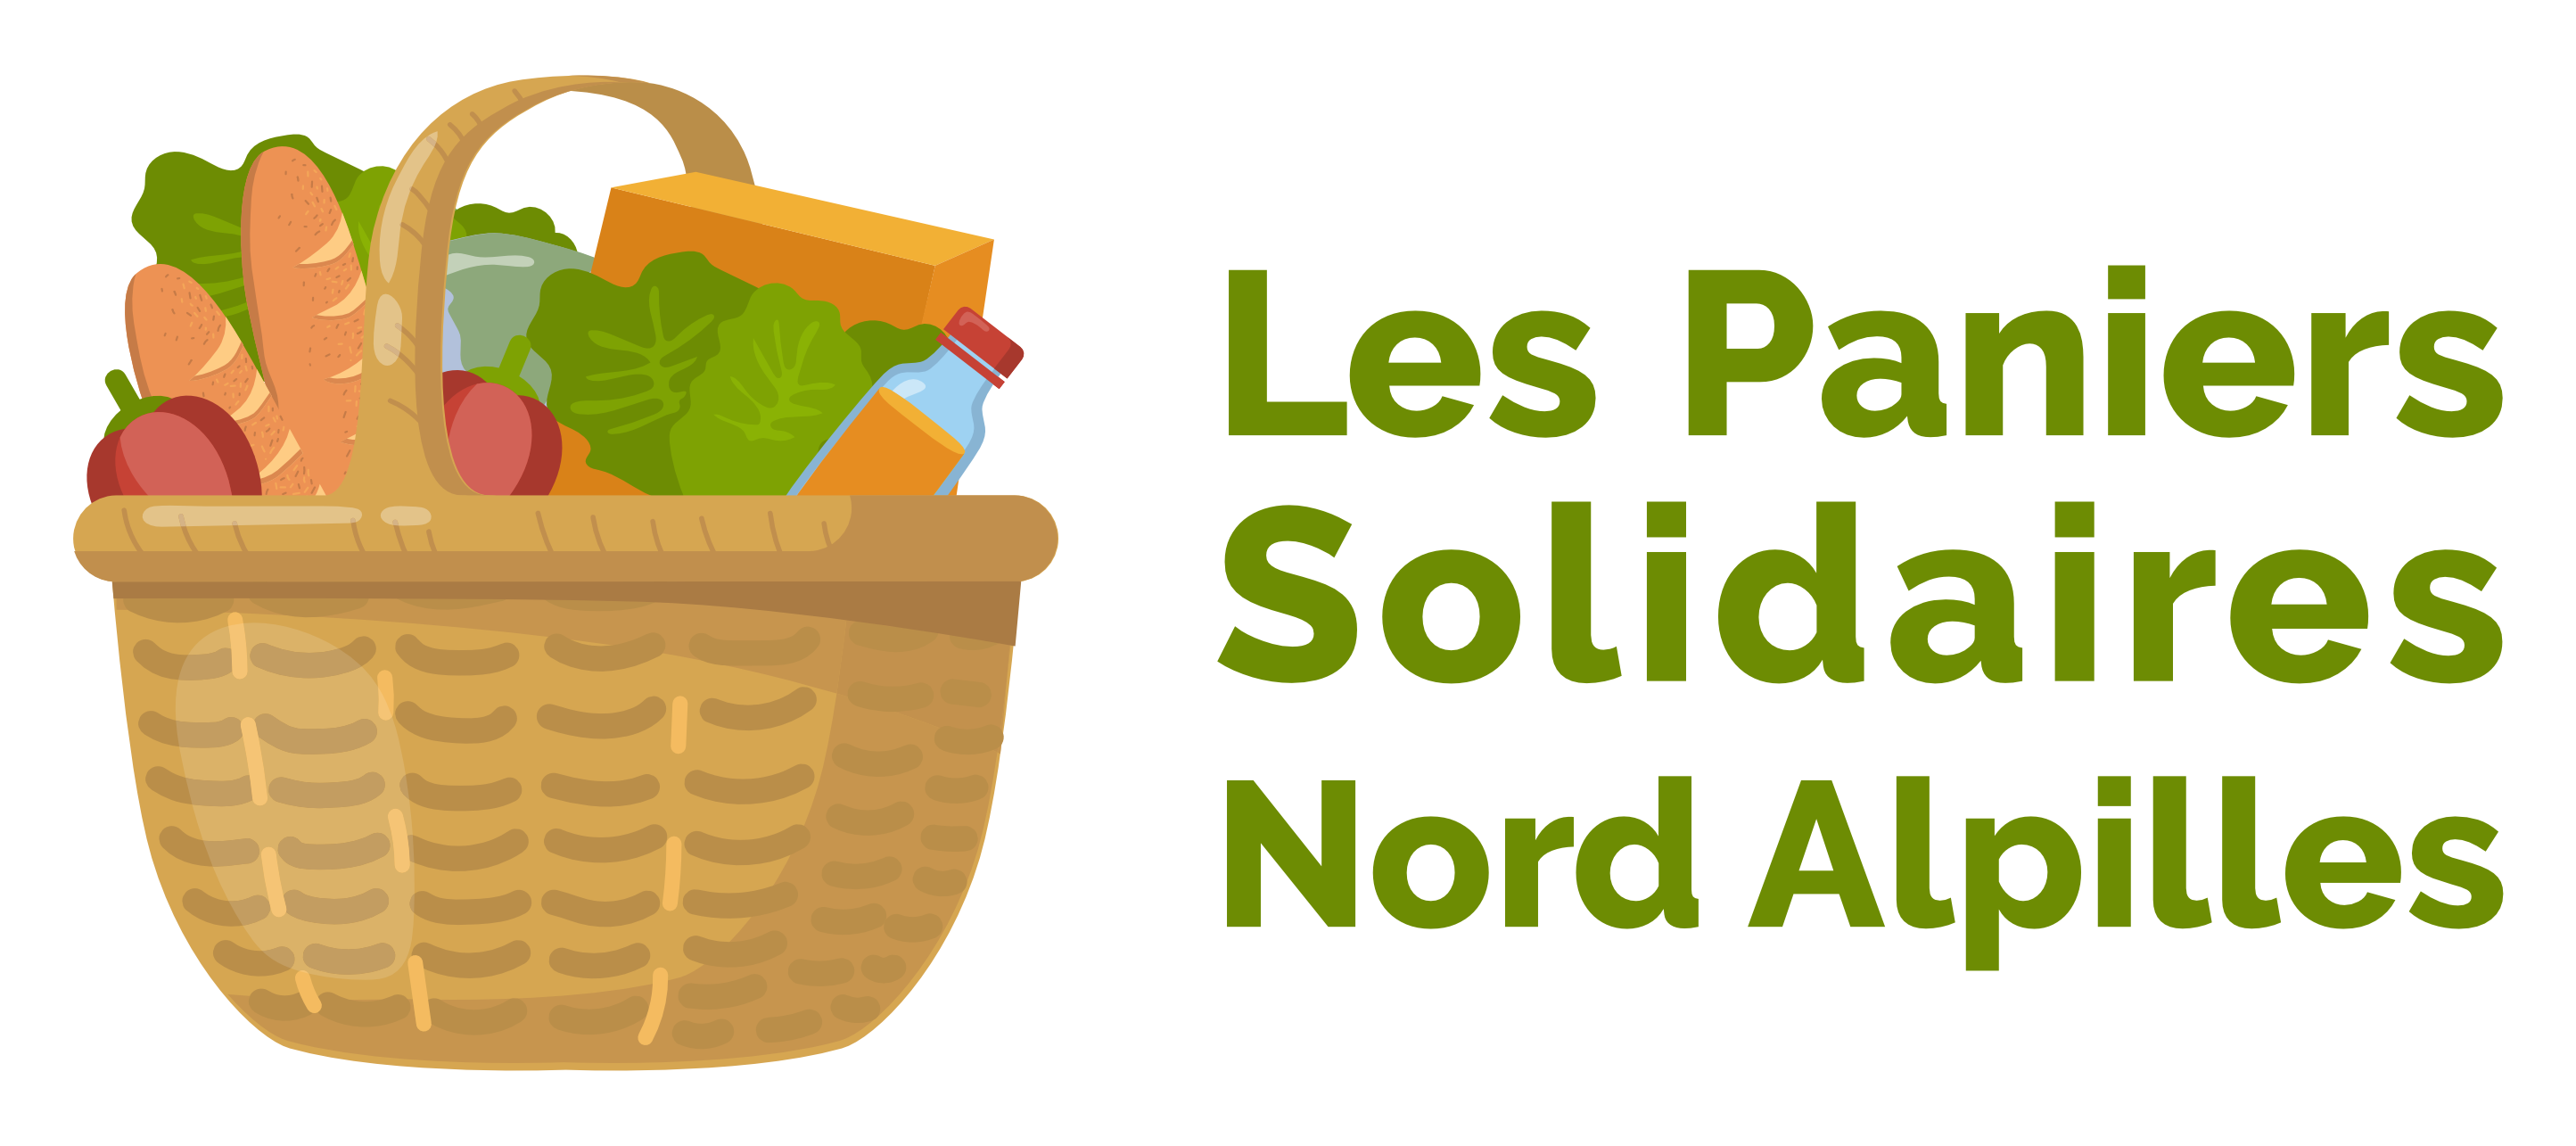 Les paniers solidaires